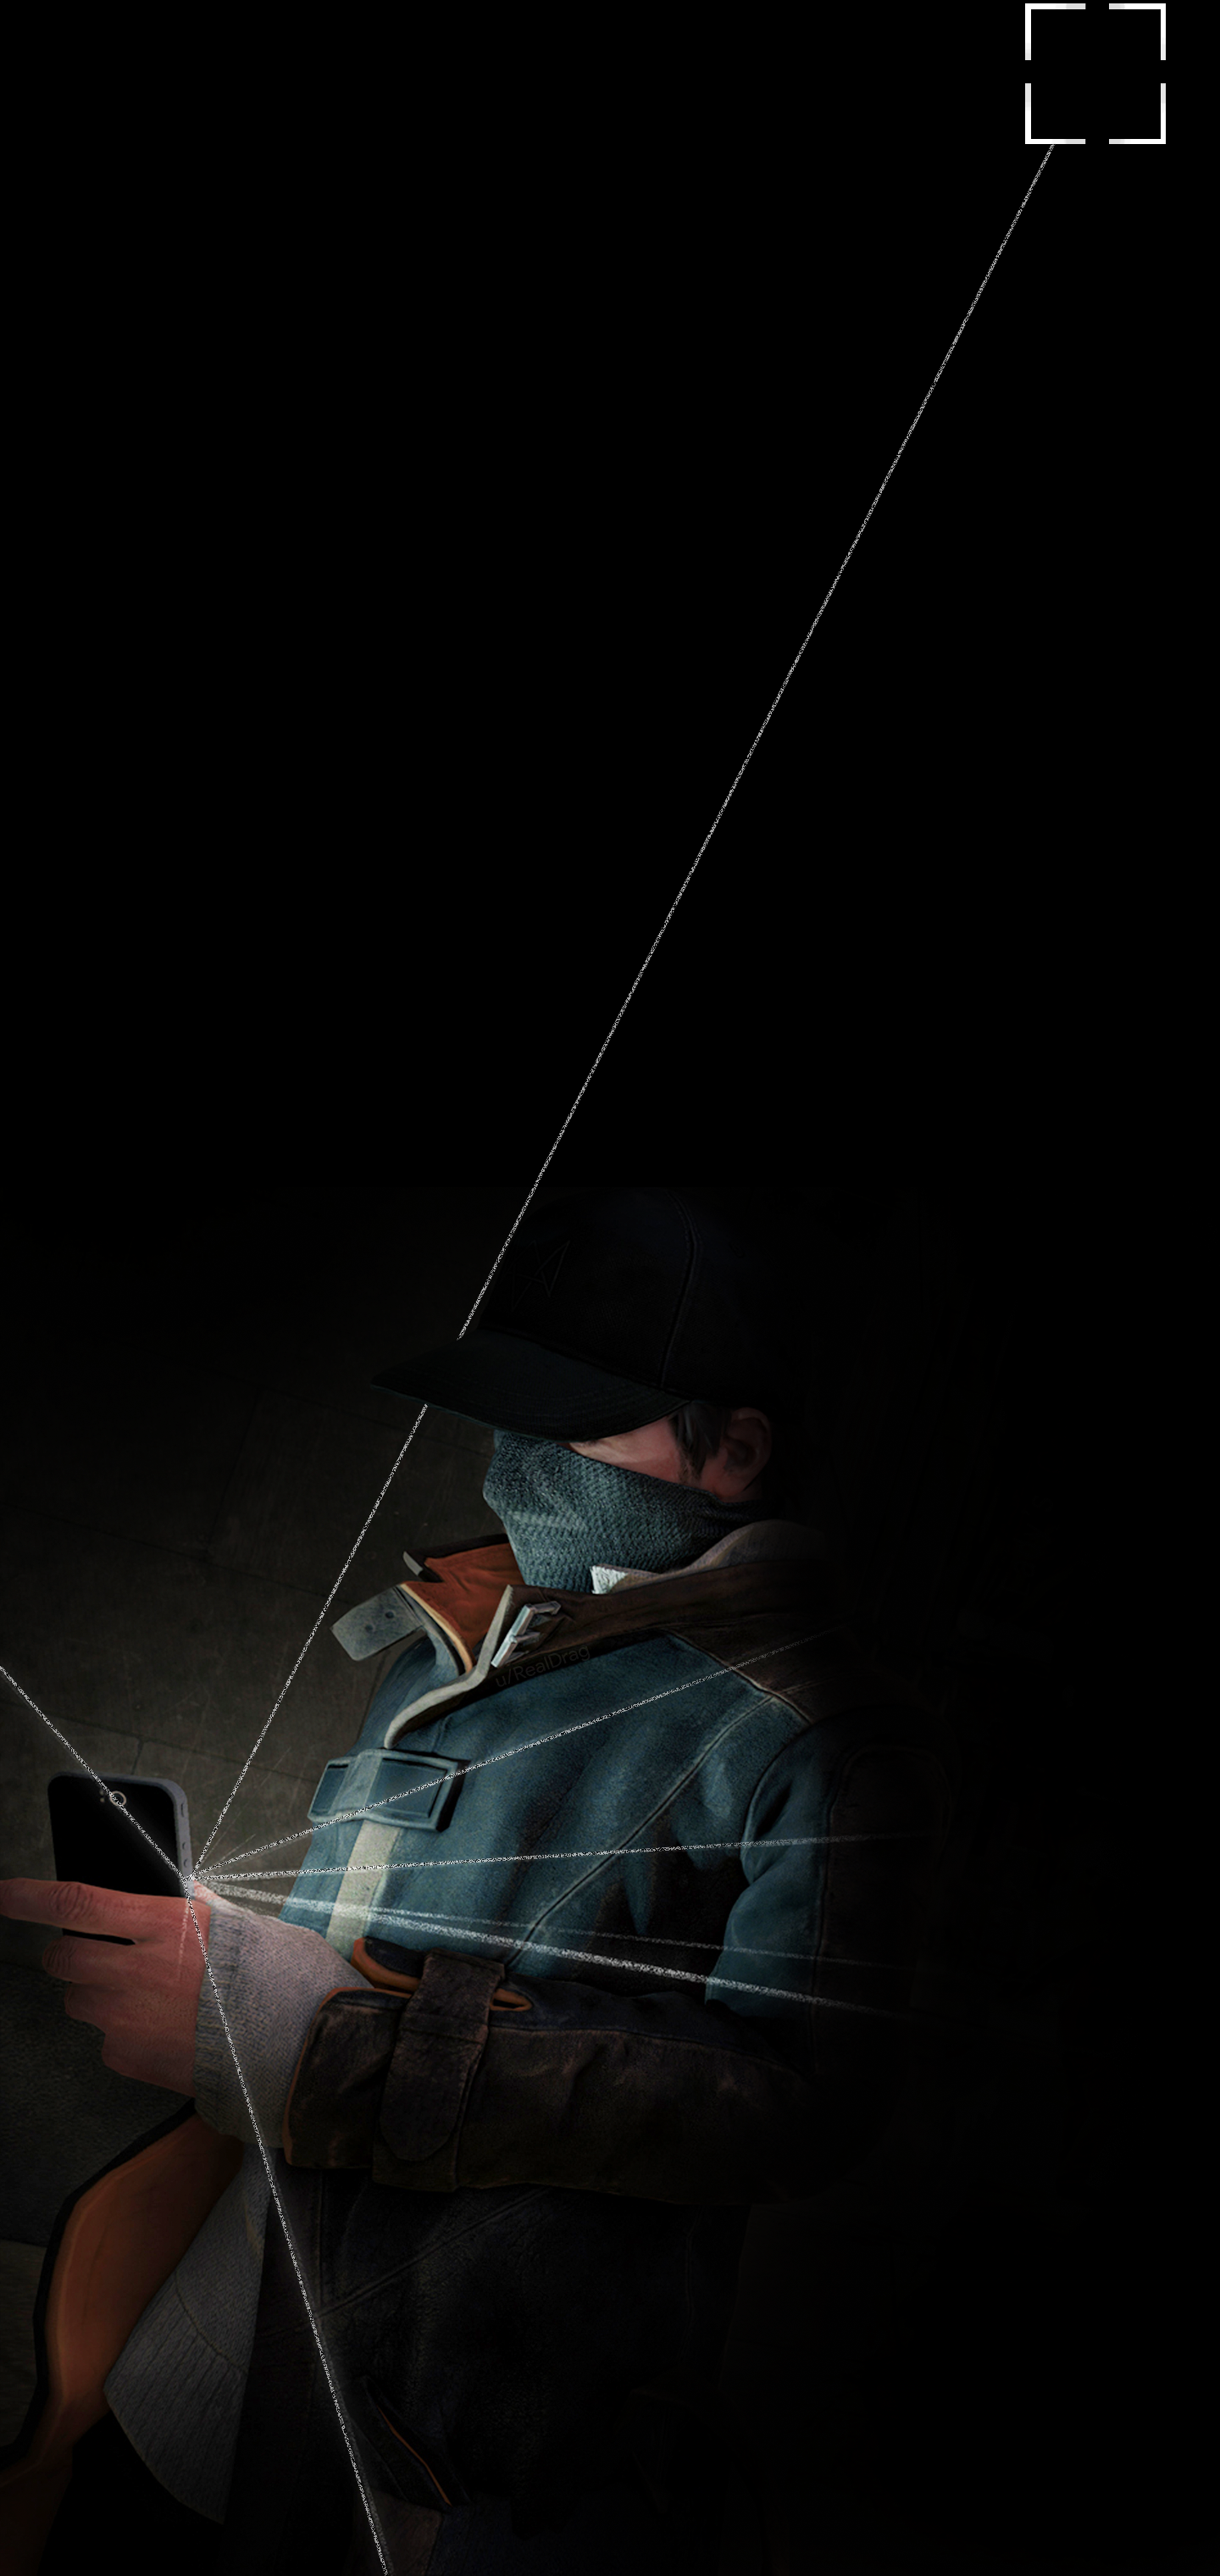 Watch Dogs Wallpaper for Samsung Galaxy S10E, S10